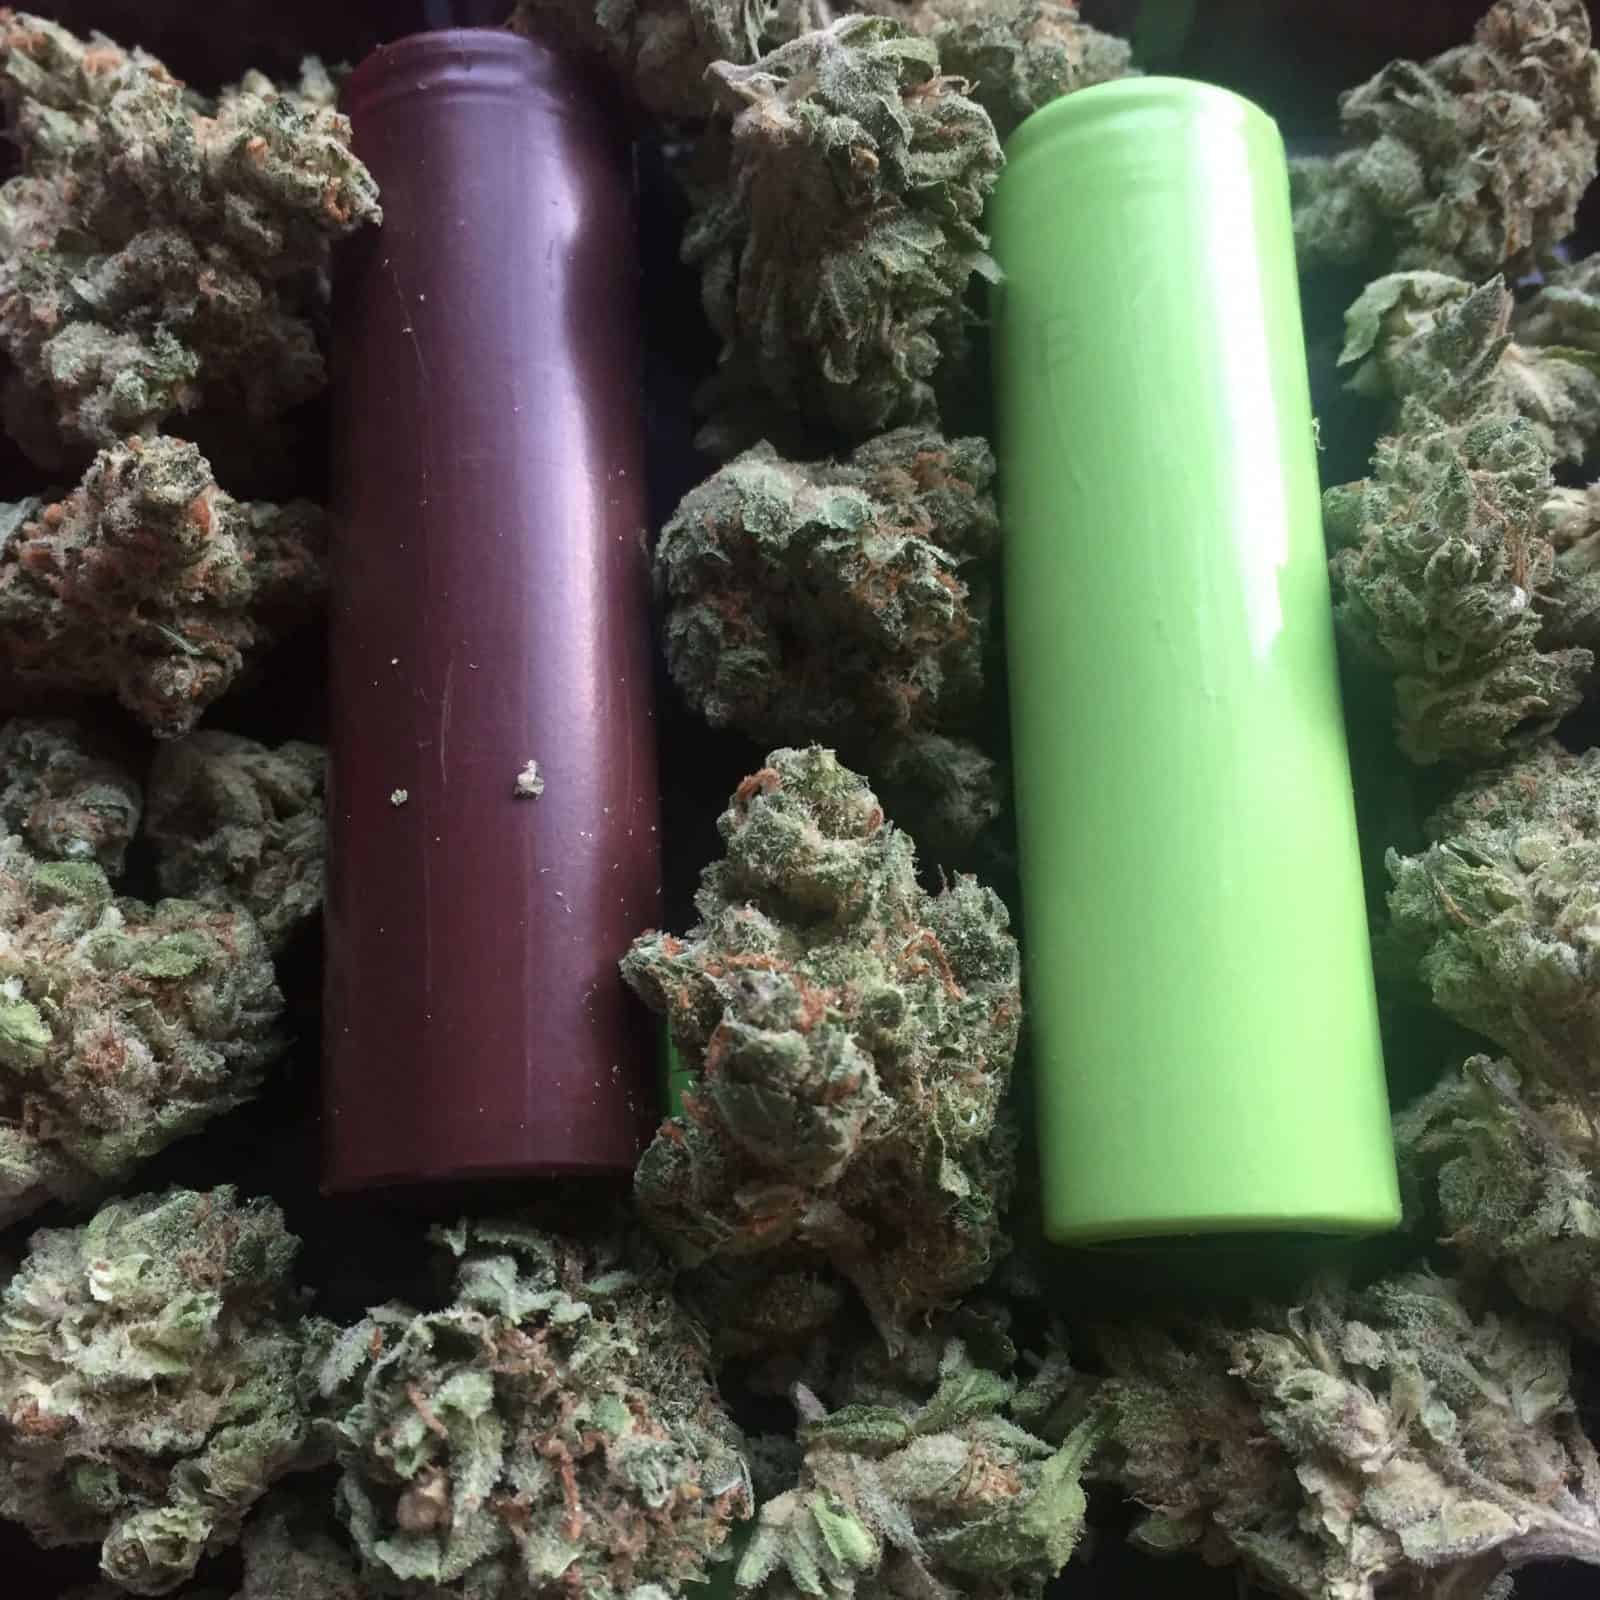 Weed Vaporizers With Removable Batteries